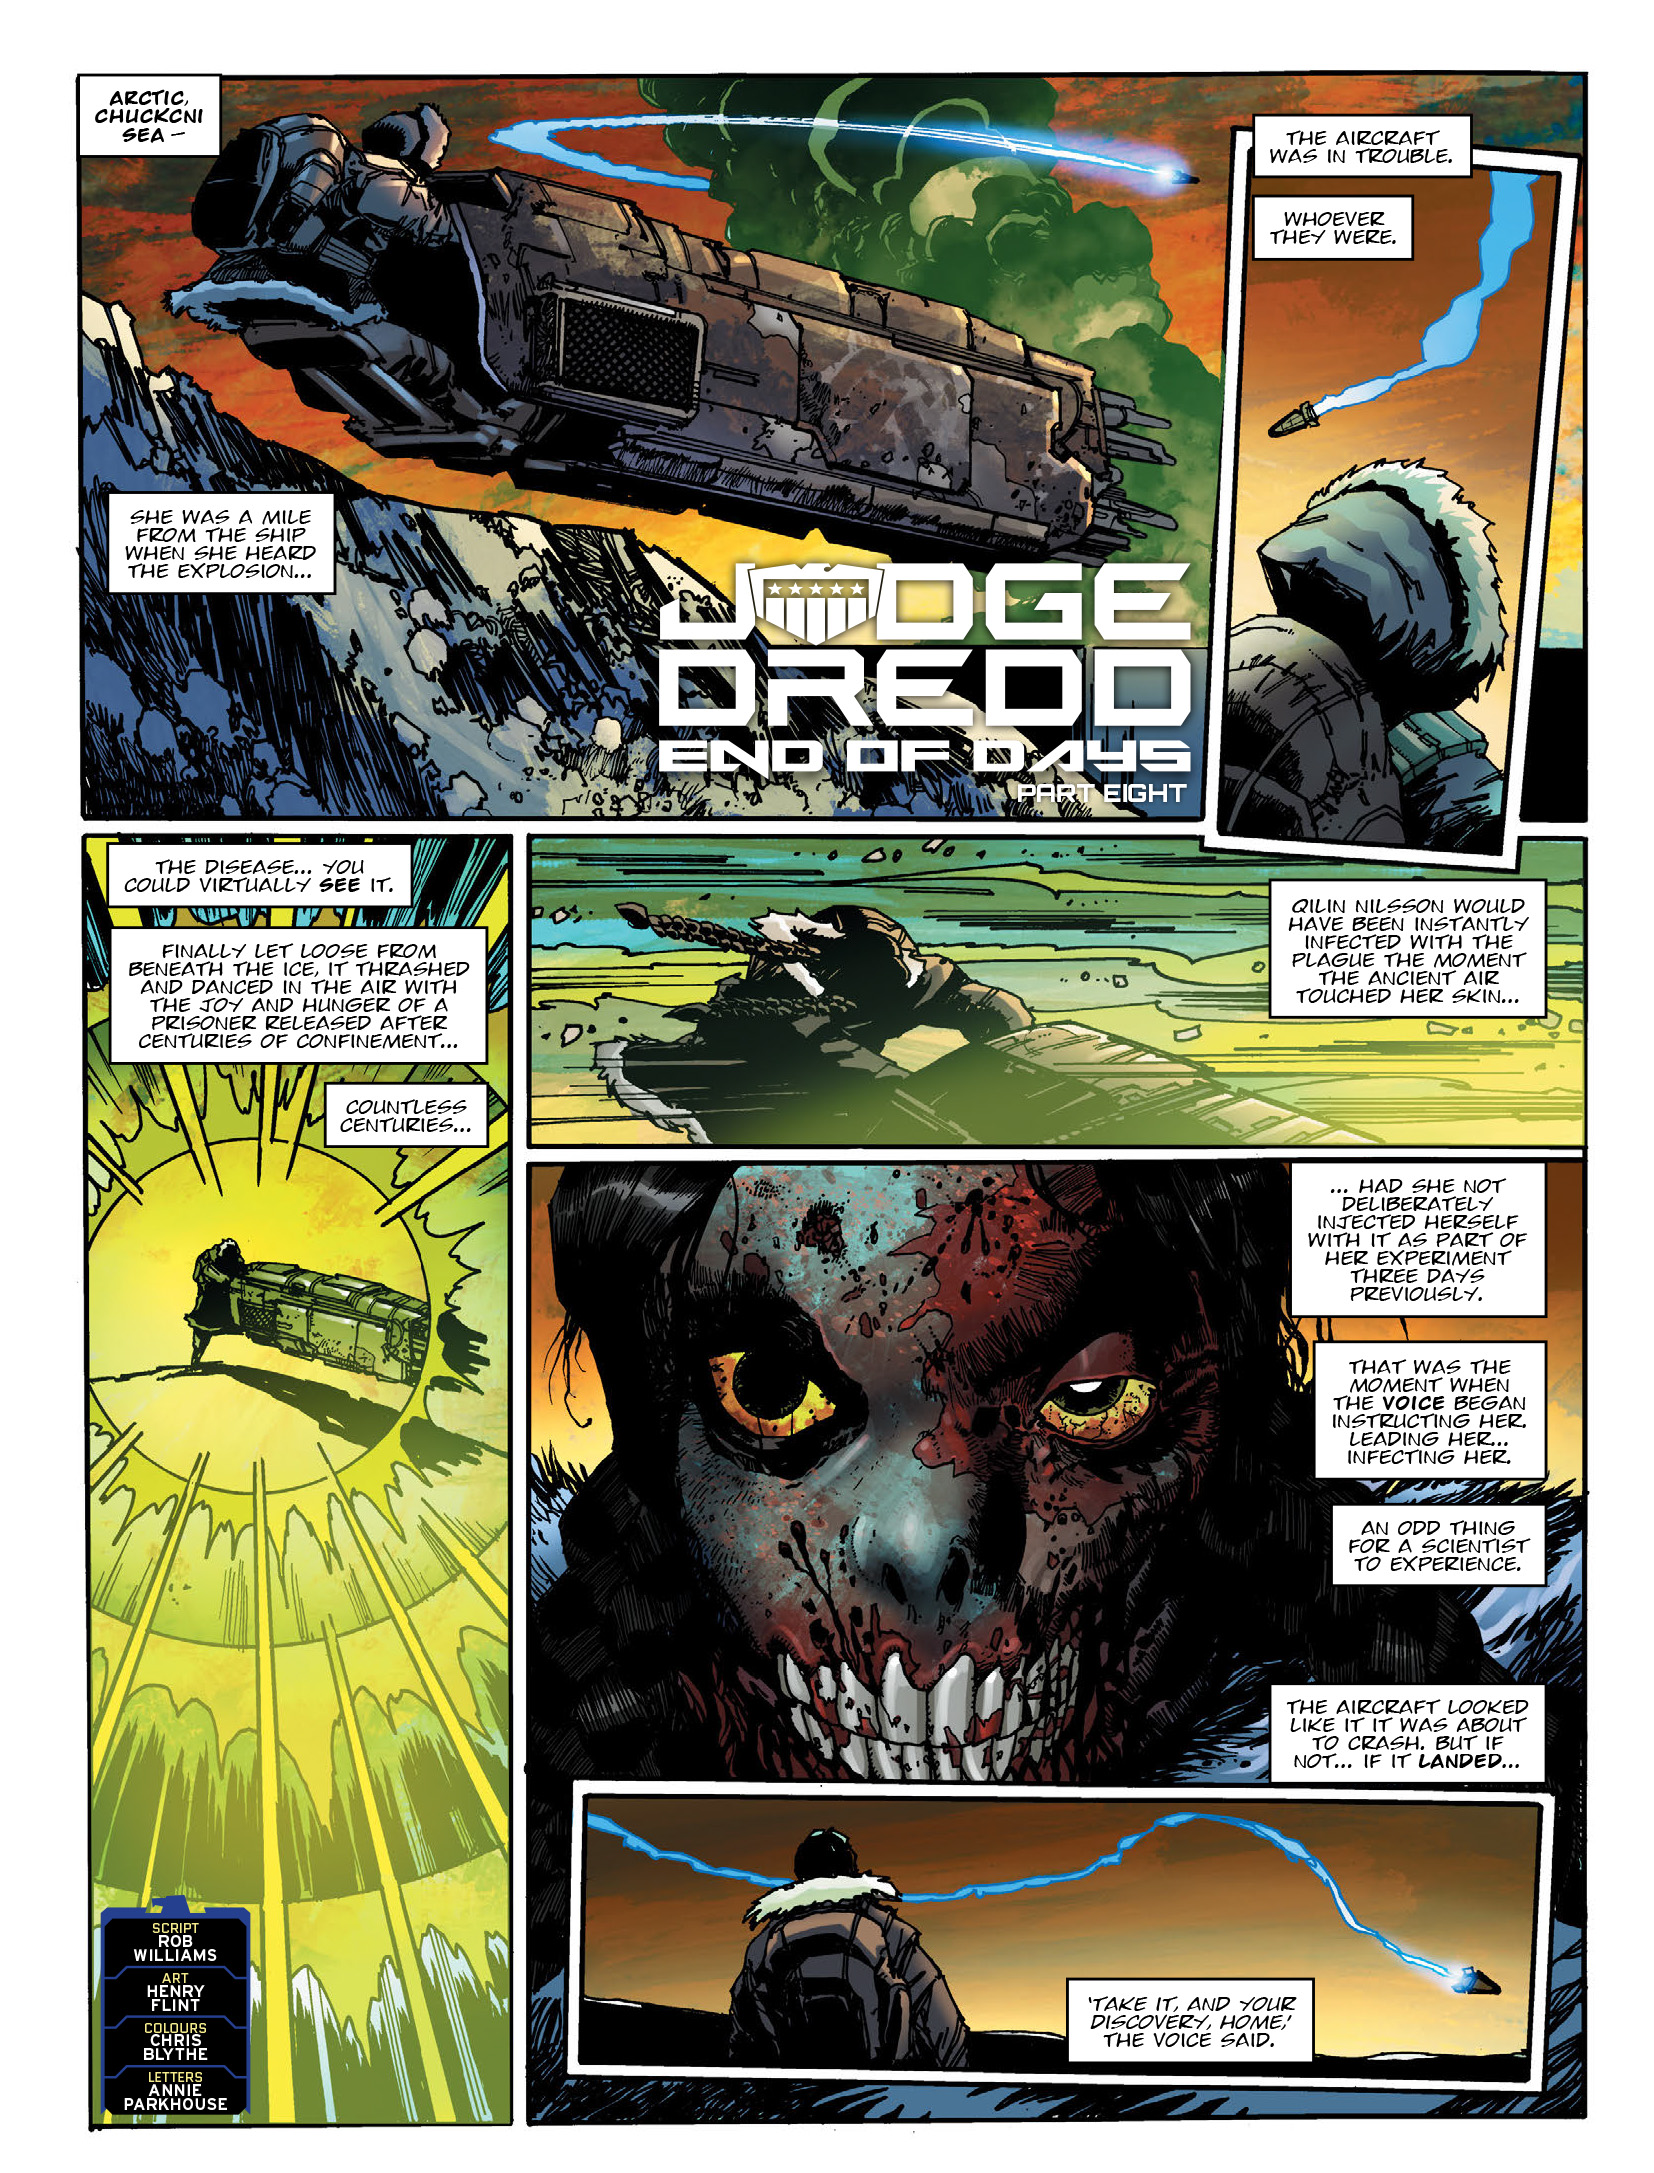 2000 AD: Chapter 2191 - Page 3